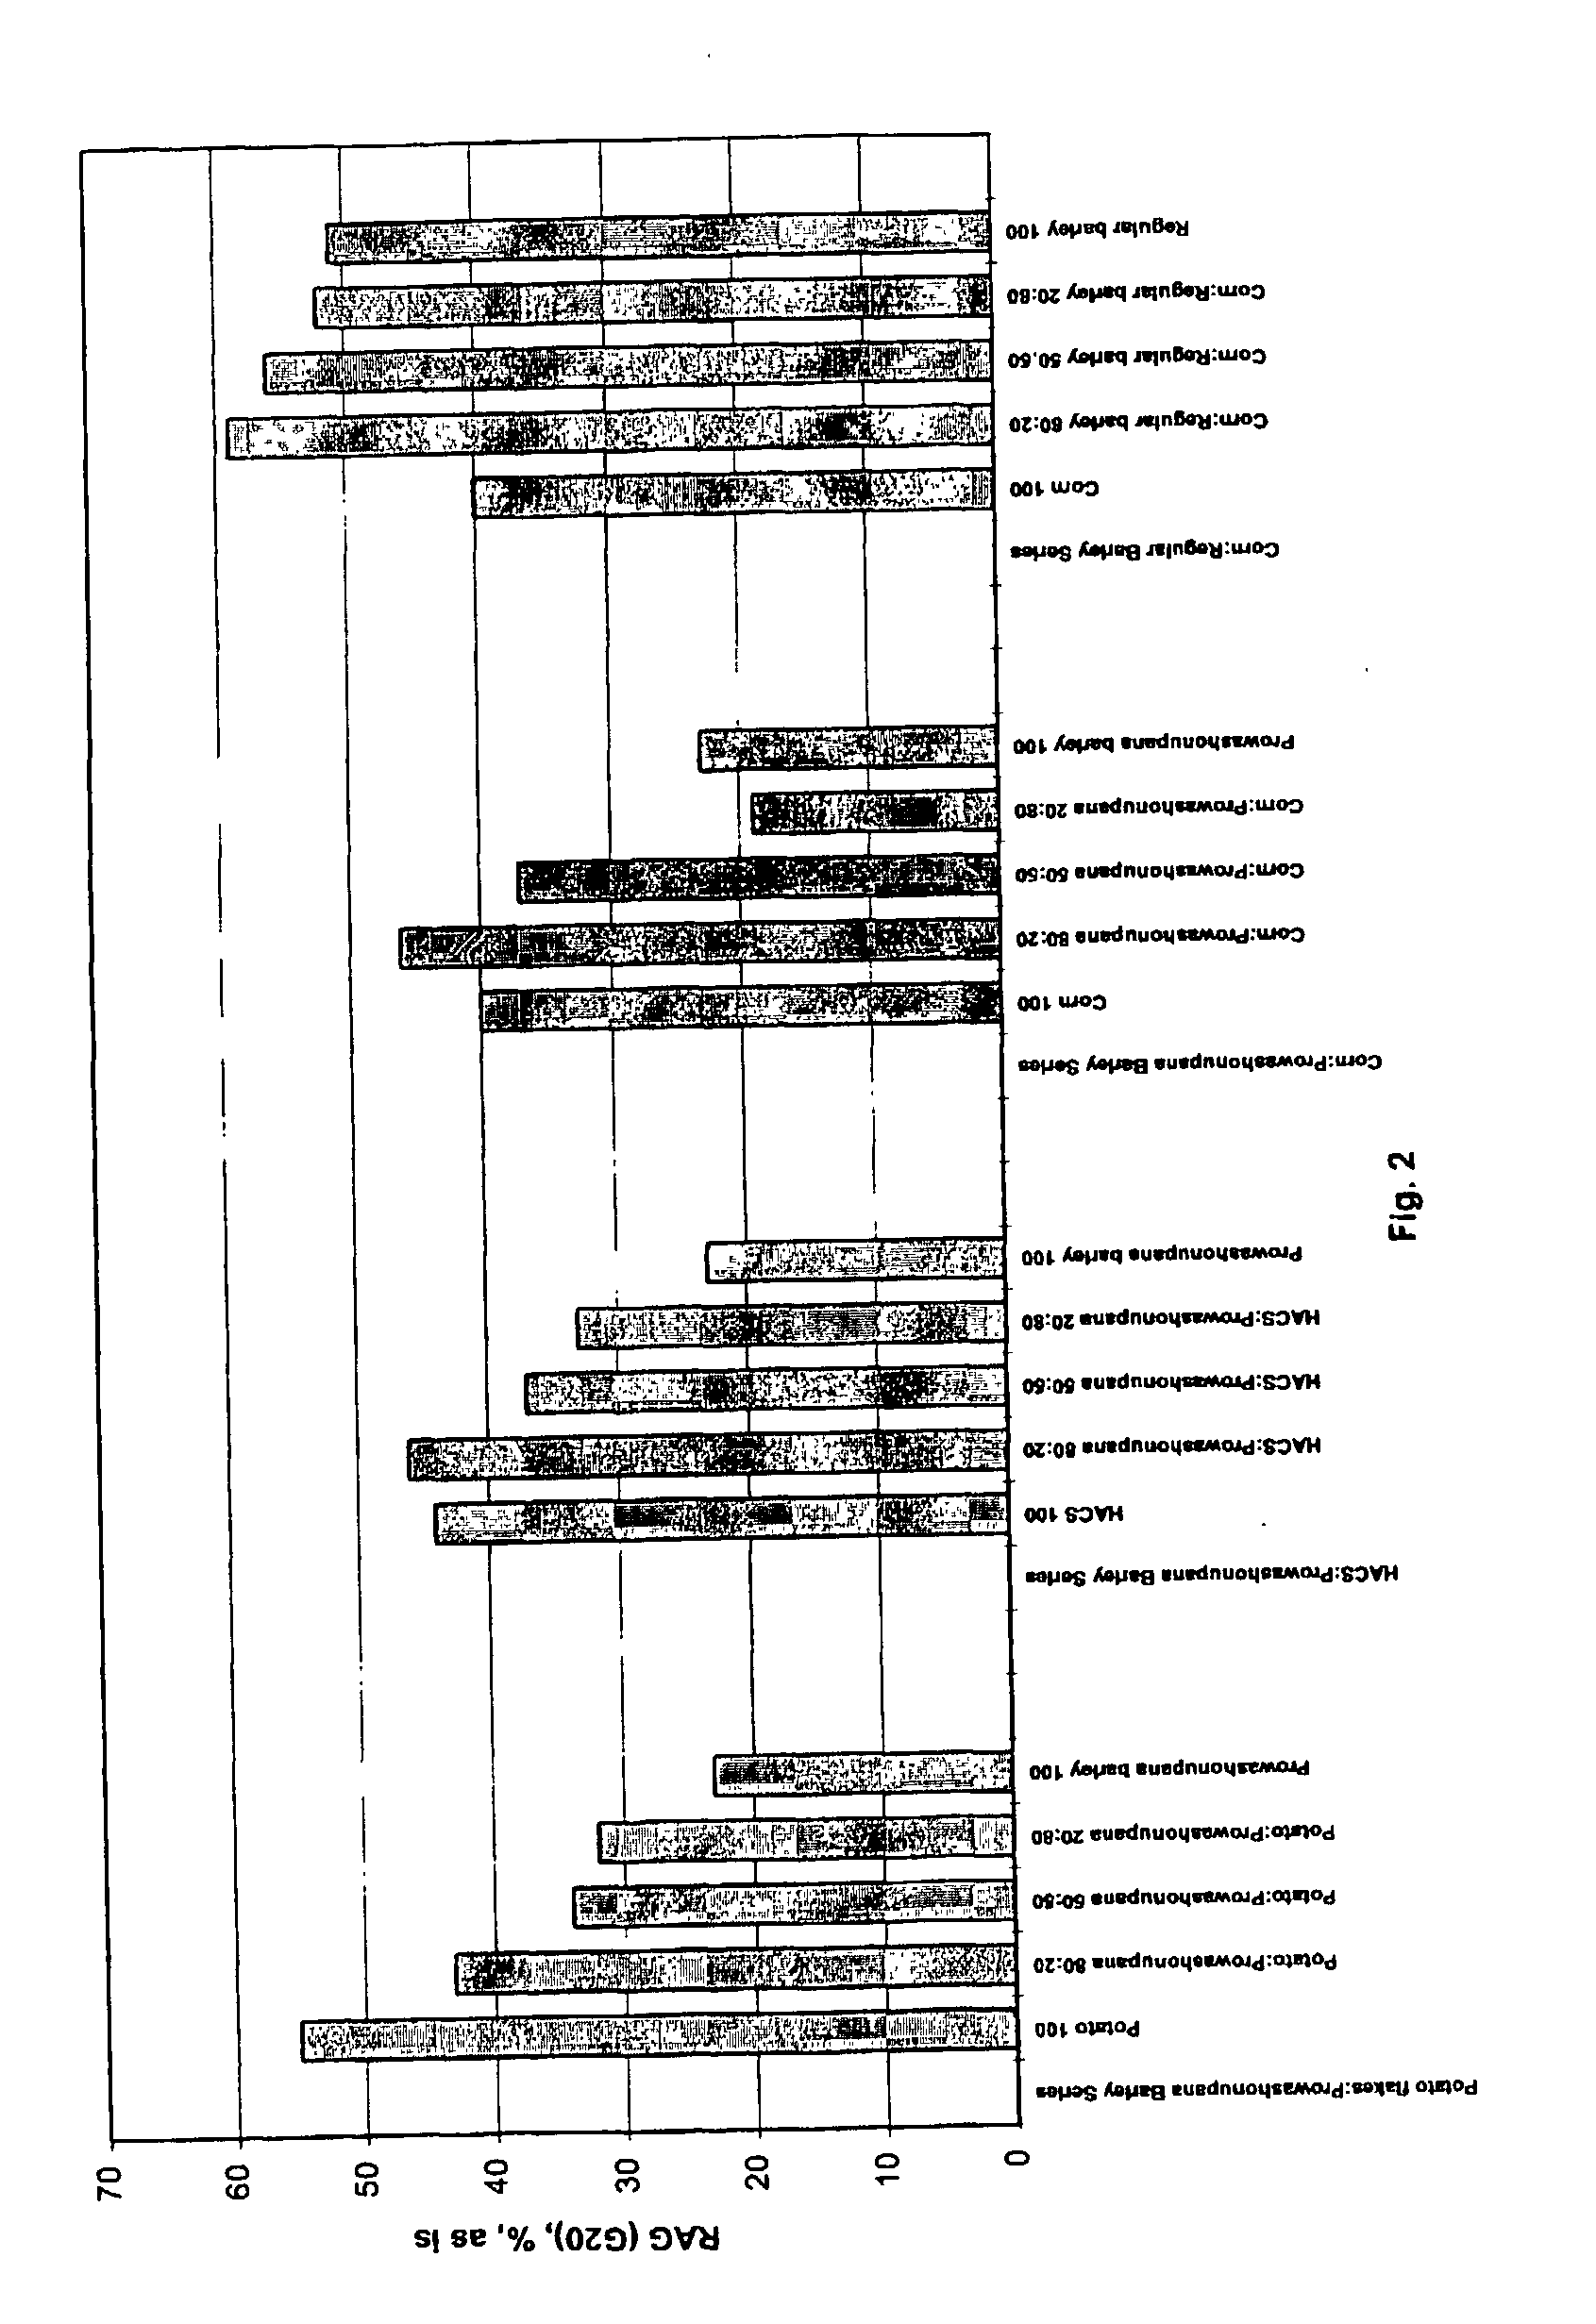 Method and composition related to low glycemic index foods